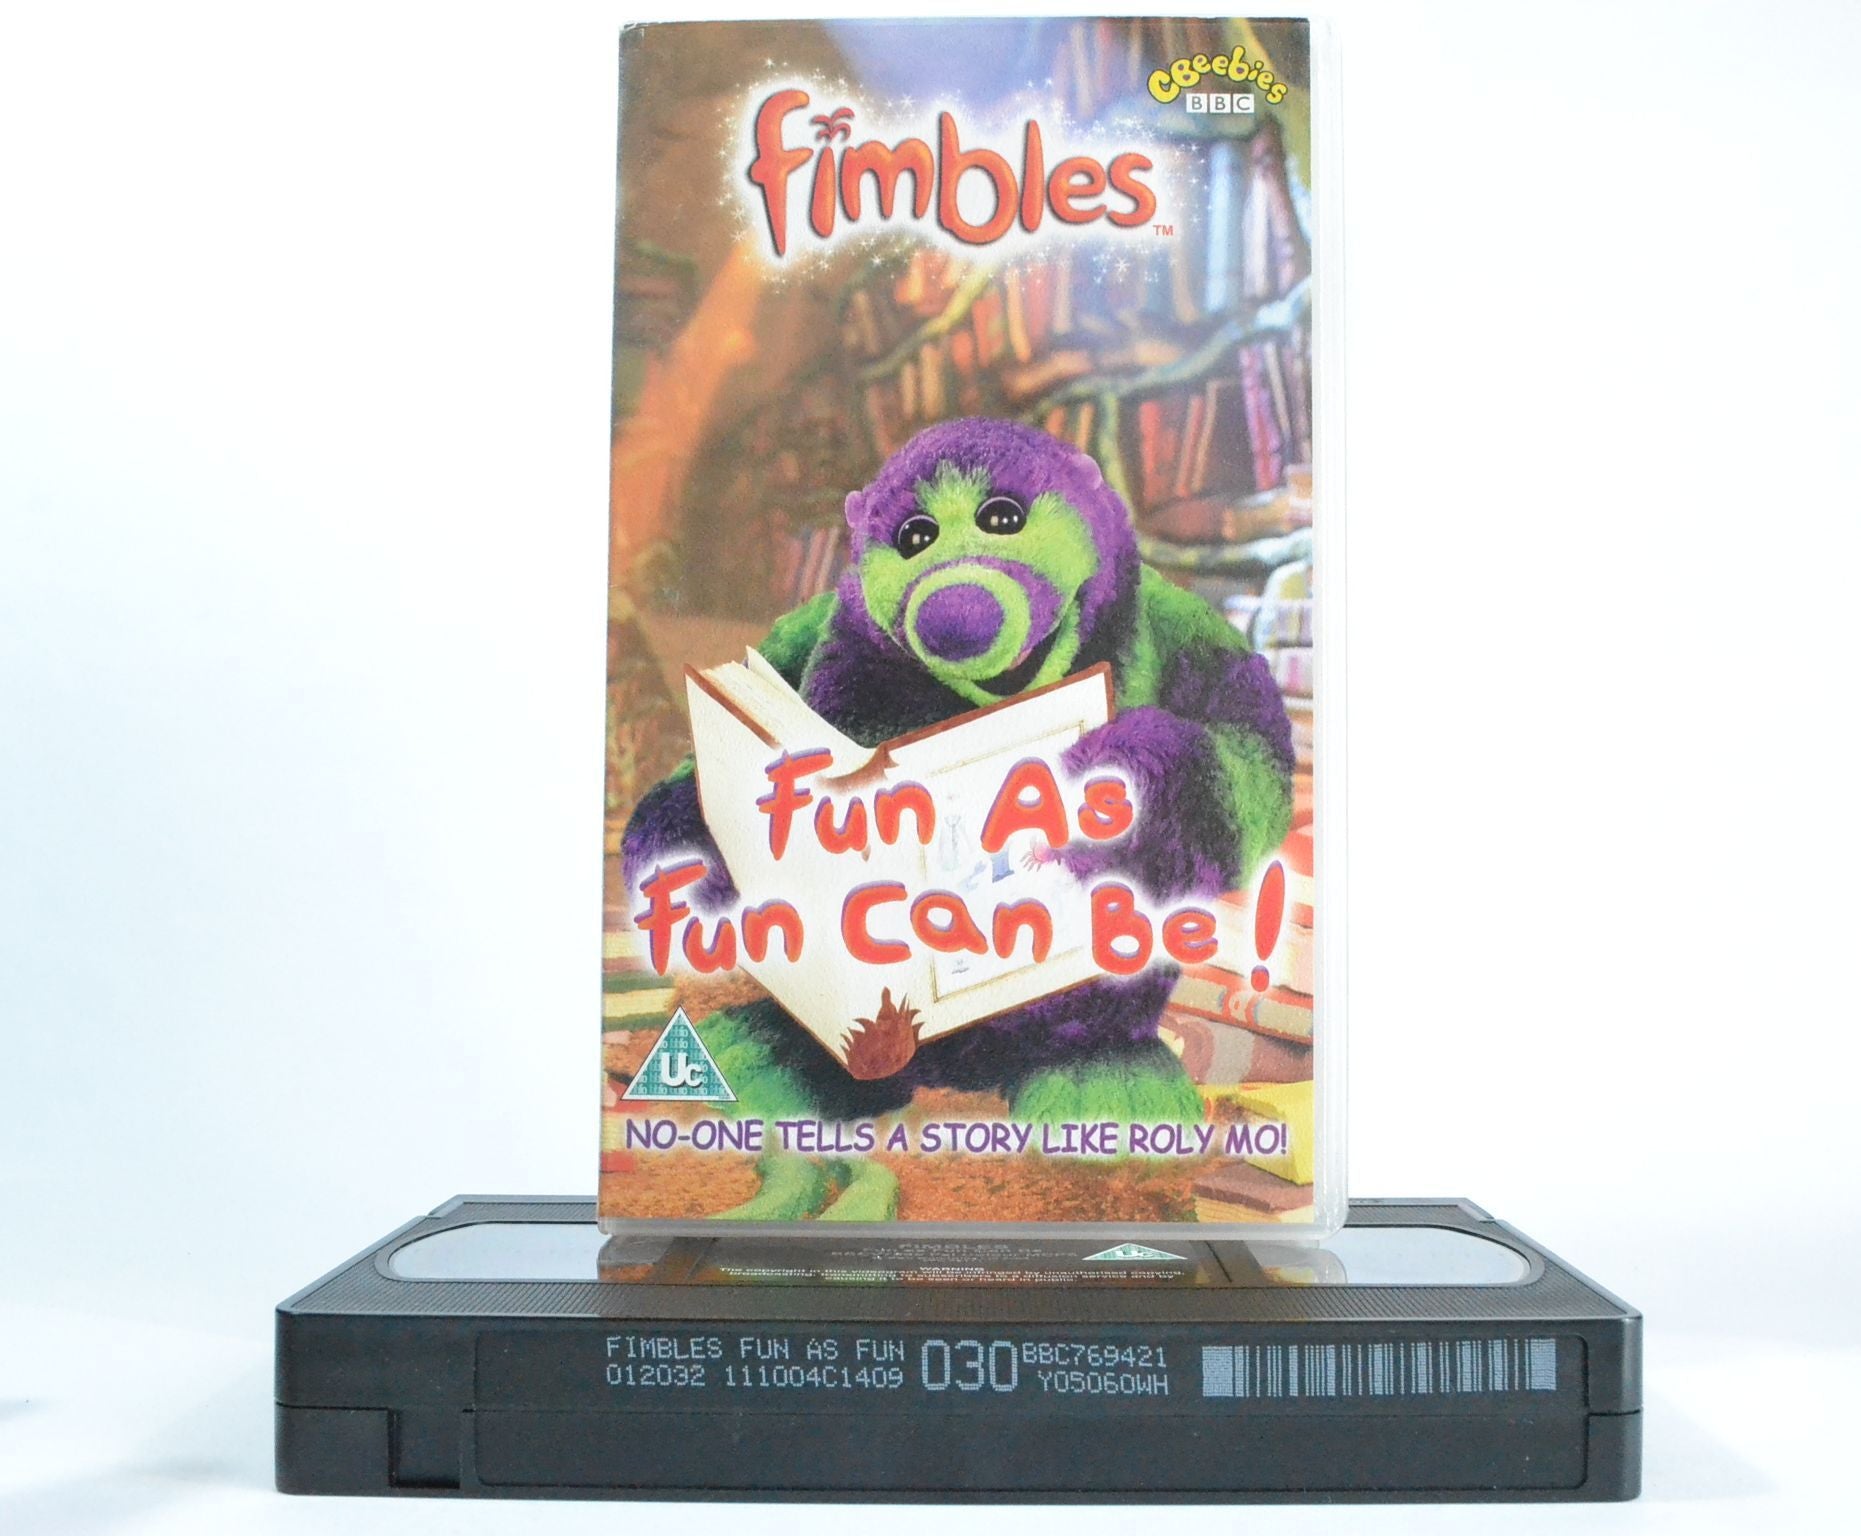 Fimbles: Fun As Fun Can Be - Lunch Bag - Learning For Children - Age 2-4 - VHS-